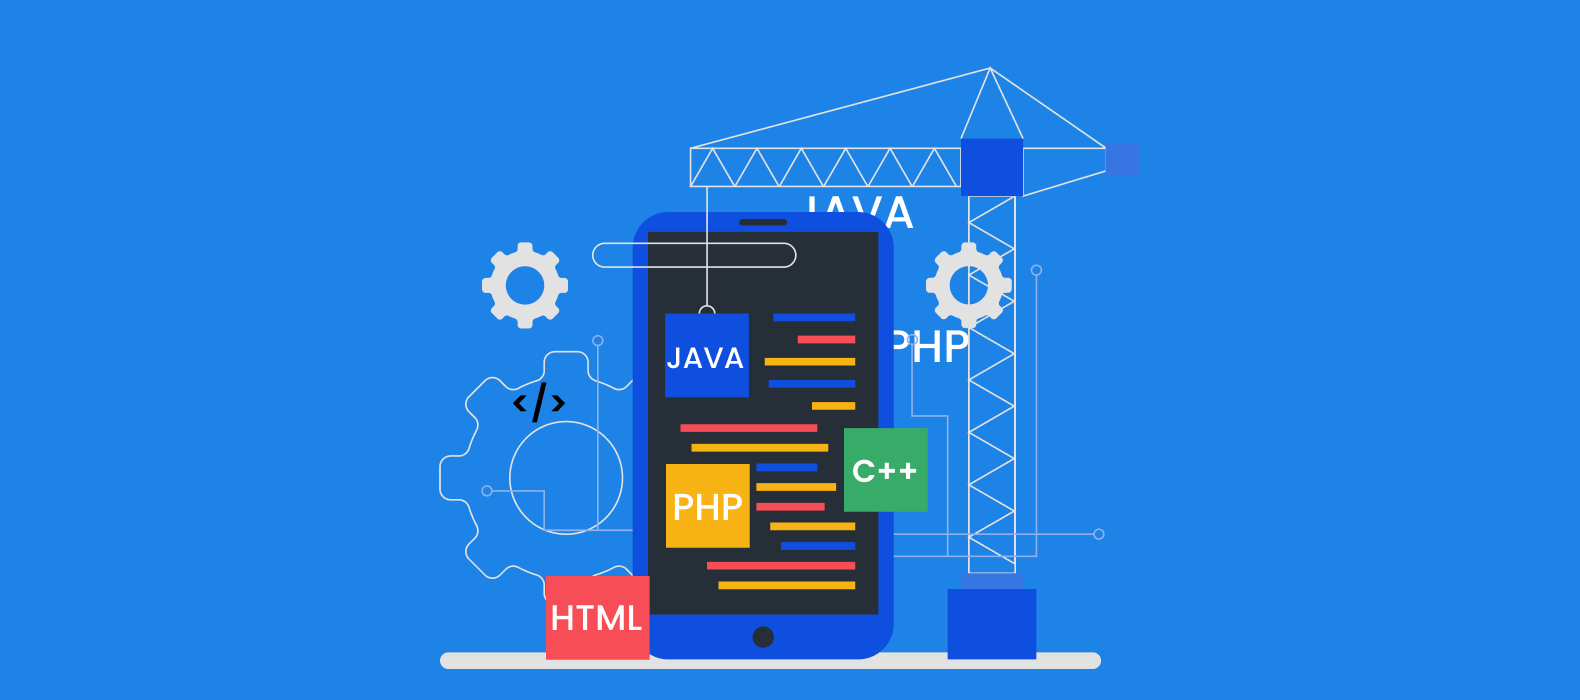 Why is it important to understand the basics of mobile app development languages